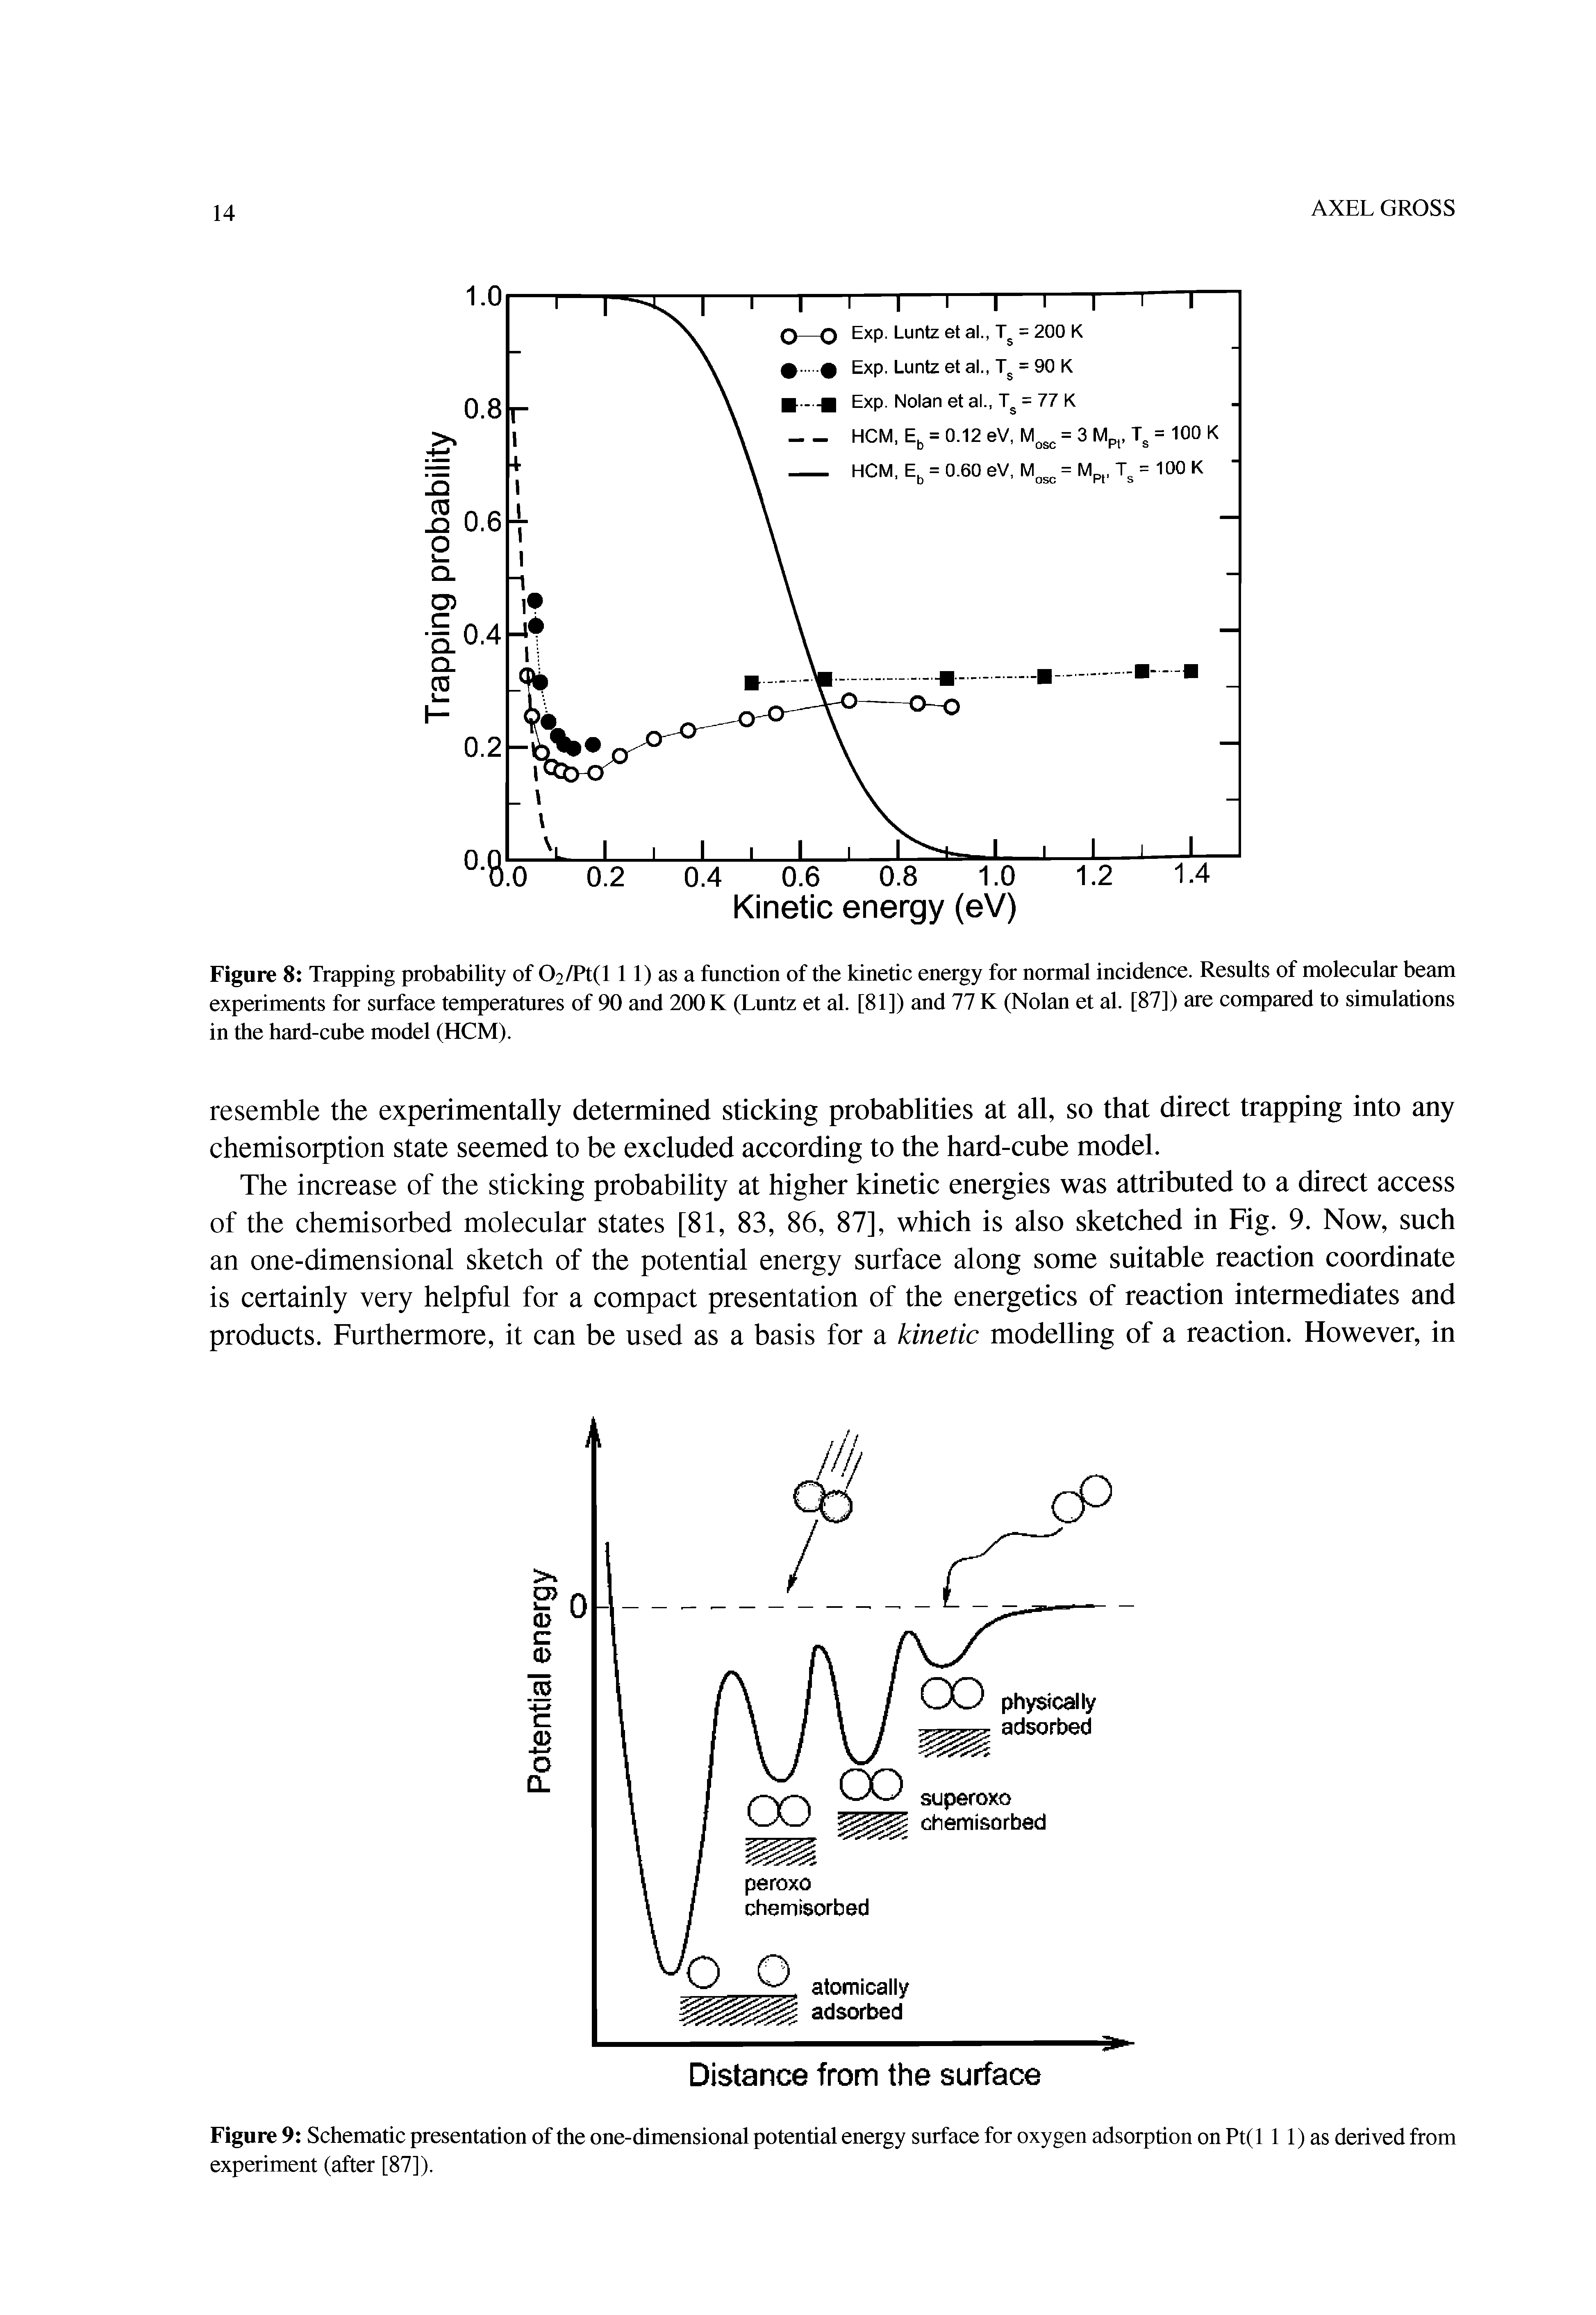 Figure 8 Trapping probability of 02/Pt(l 11) as a function of the kinetic energy for normal incidence. Results of molecular beam experiments for surface temperatures of 90 and 200 K (Luntz et al. [81]) and 77 K (Nolan et al. [87]) are compared to simulations in the hard-cube model (HCM).